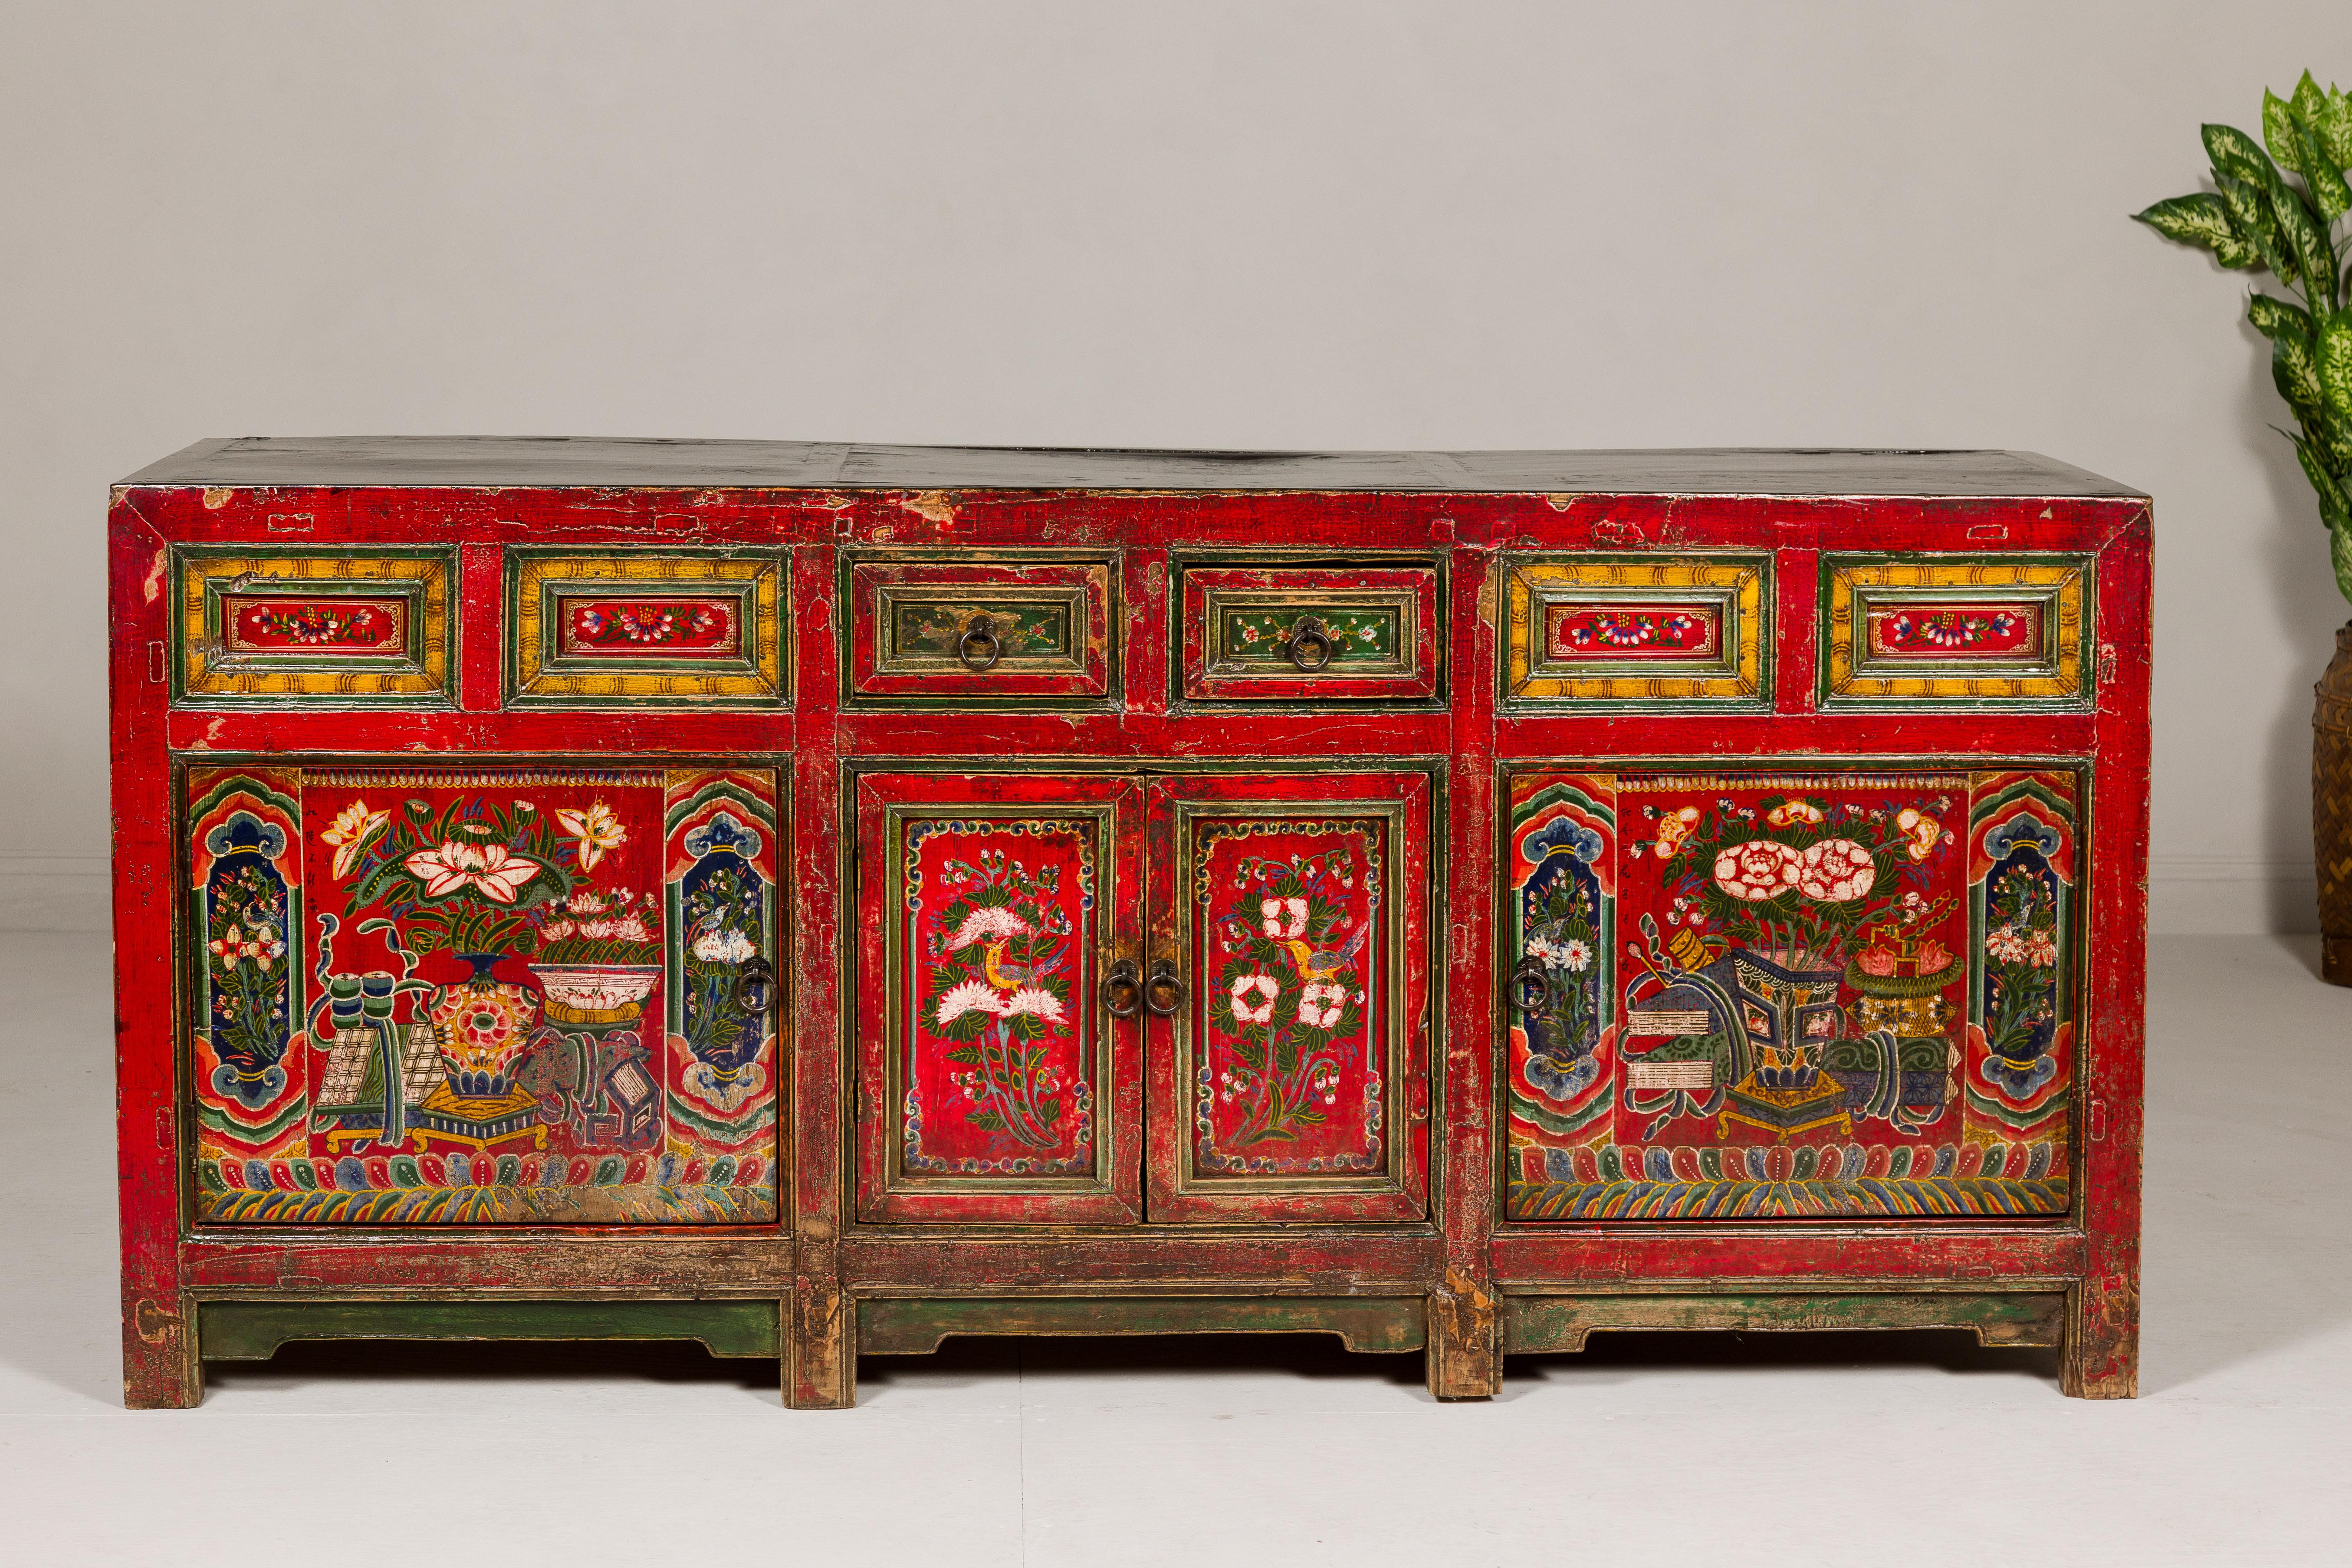 19th Century Mongolian Polychrome Sideboard with Doors, Drawers and Floral Décor For Sale 9